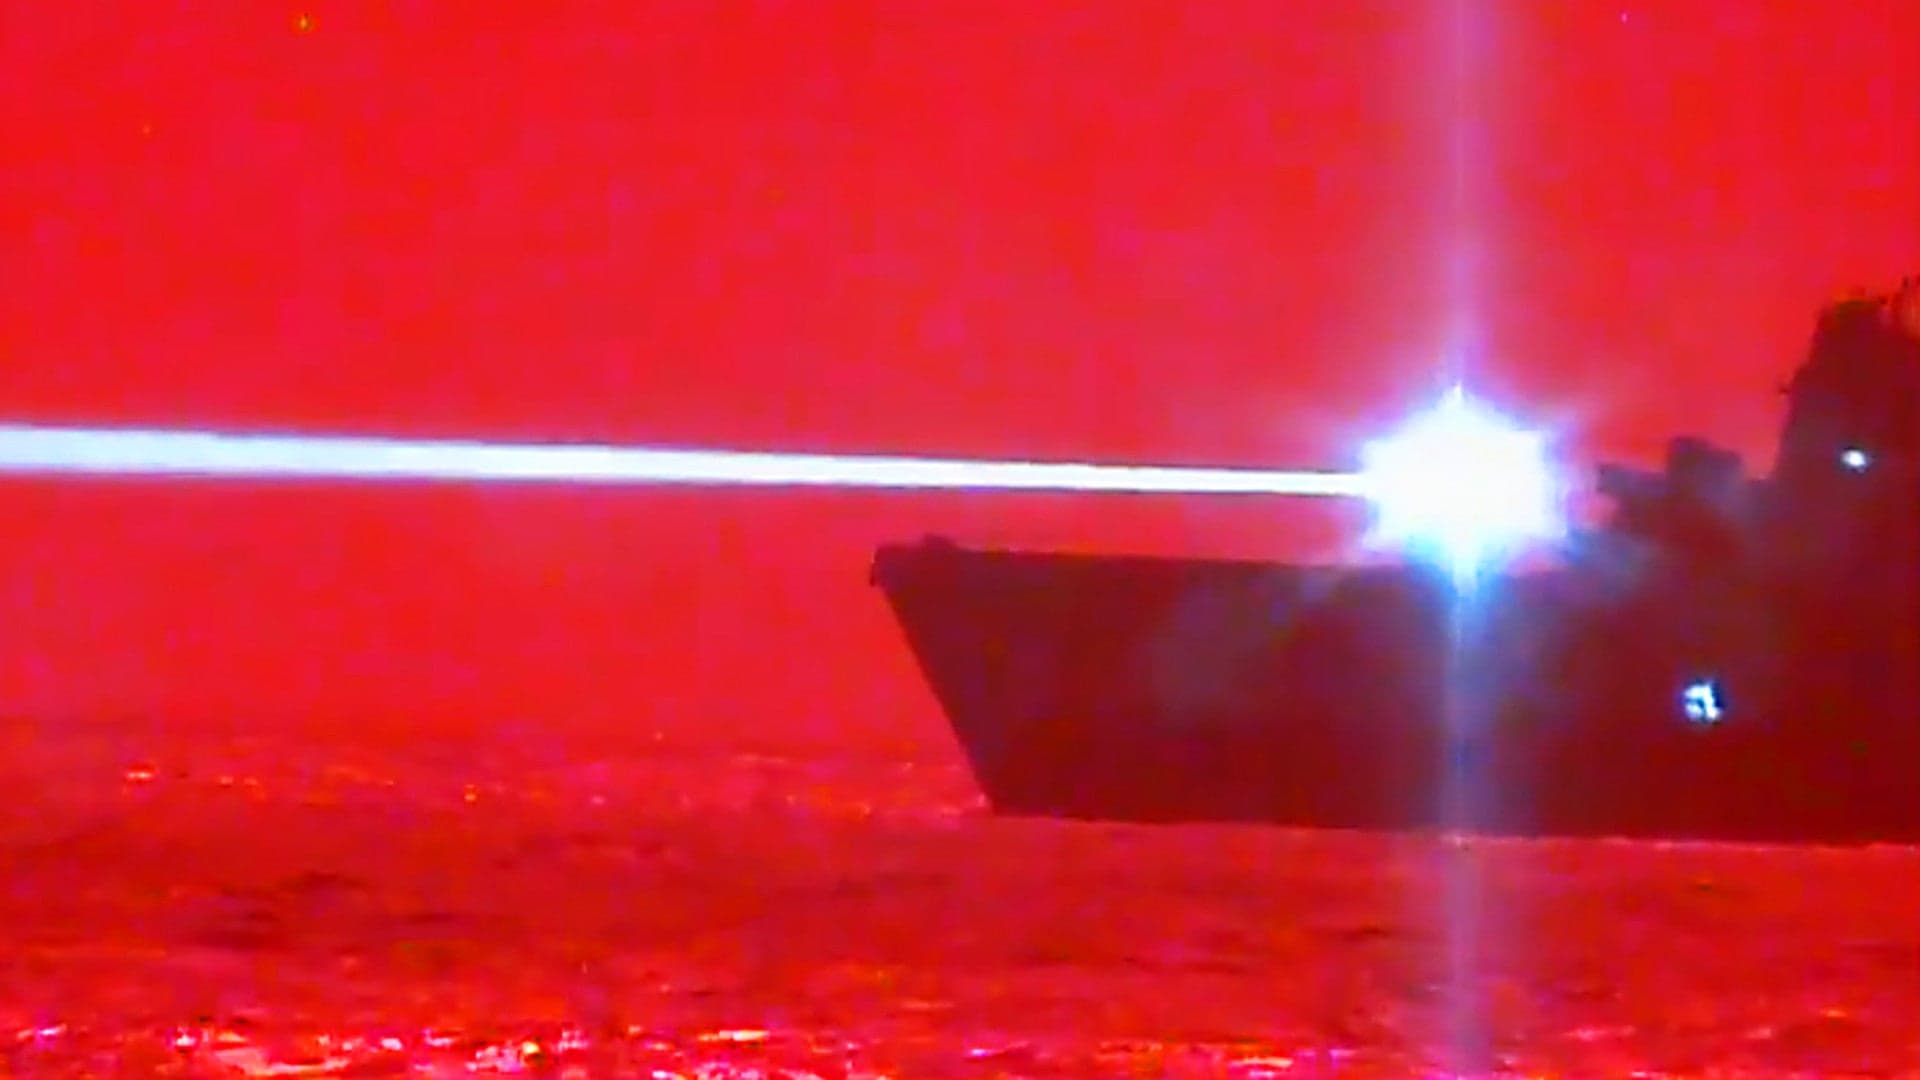 The Amphibious Warship USS Portland Has Shot Down A Drone With Its New High-Power Laser